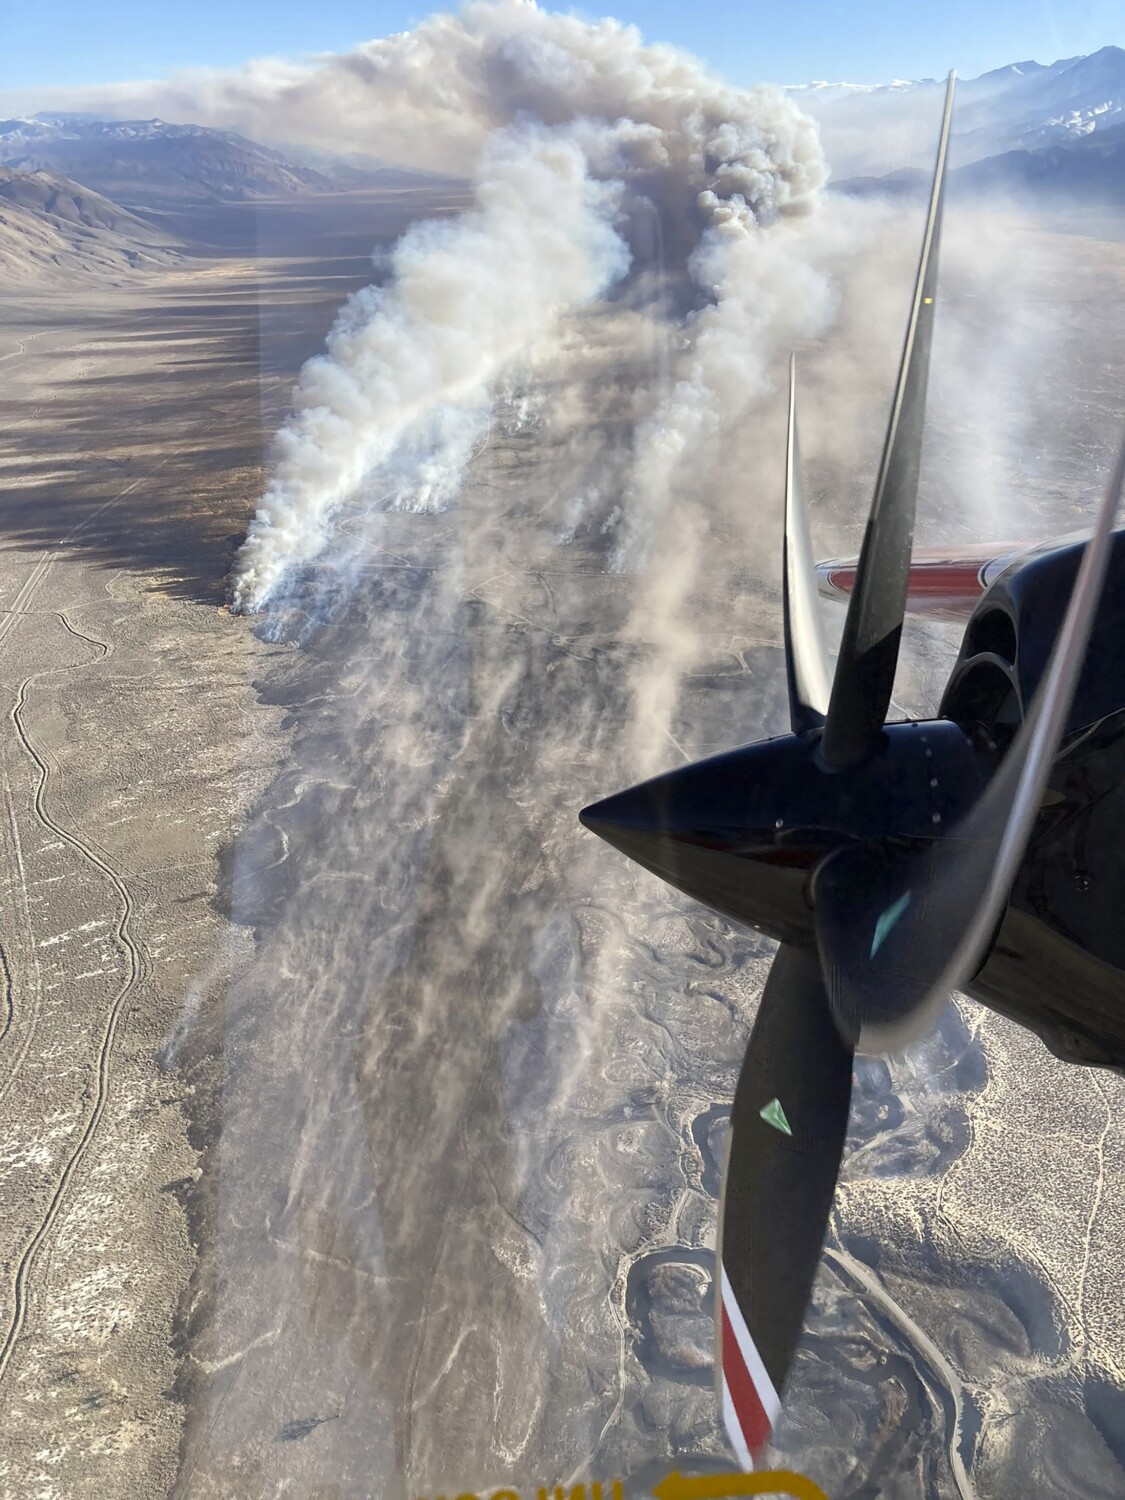 Firefighters make good progress on wildfire burning near Bishop, with 40% containment